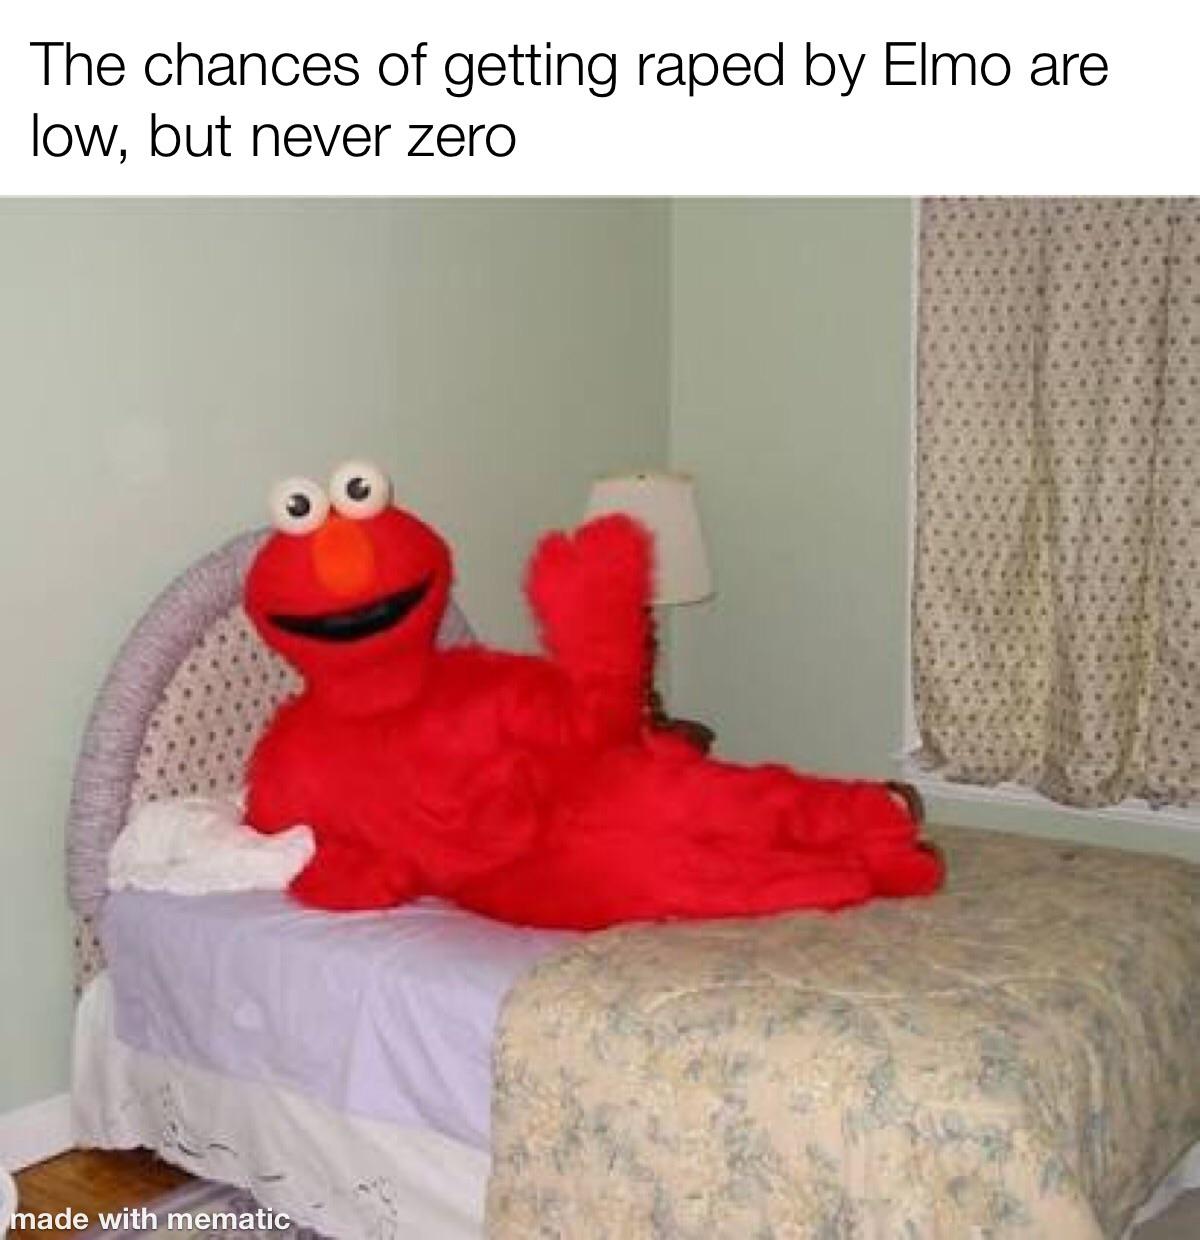 50+ Funny Elmo Memes That Will Make You Laugh.